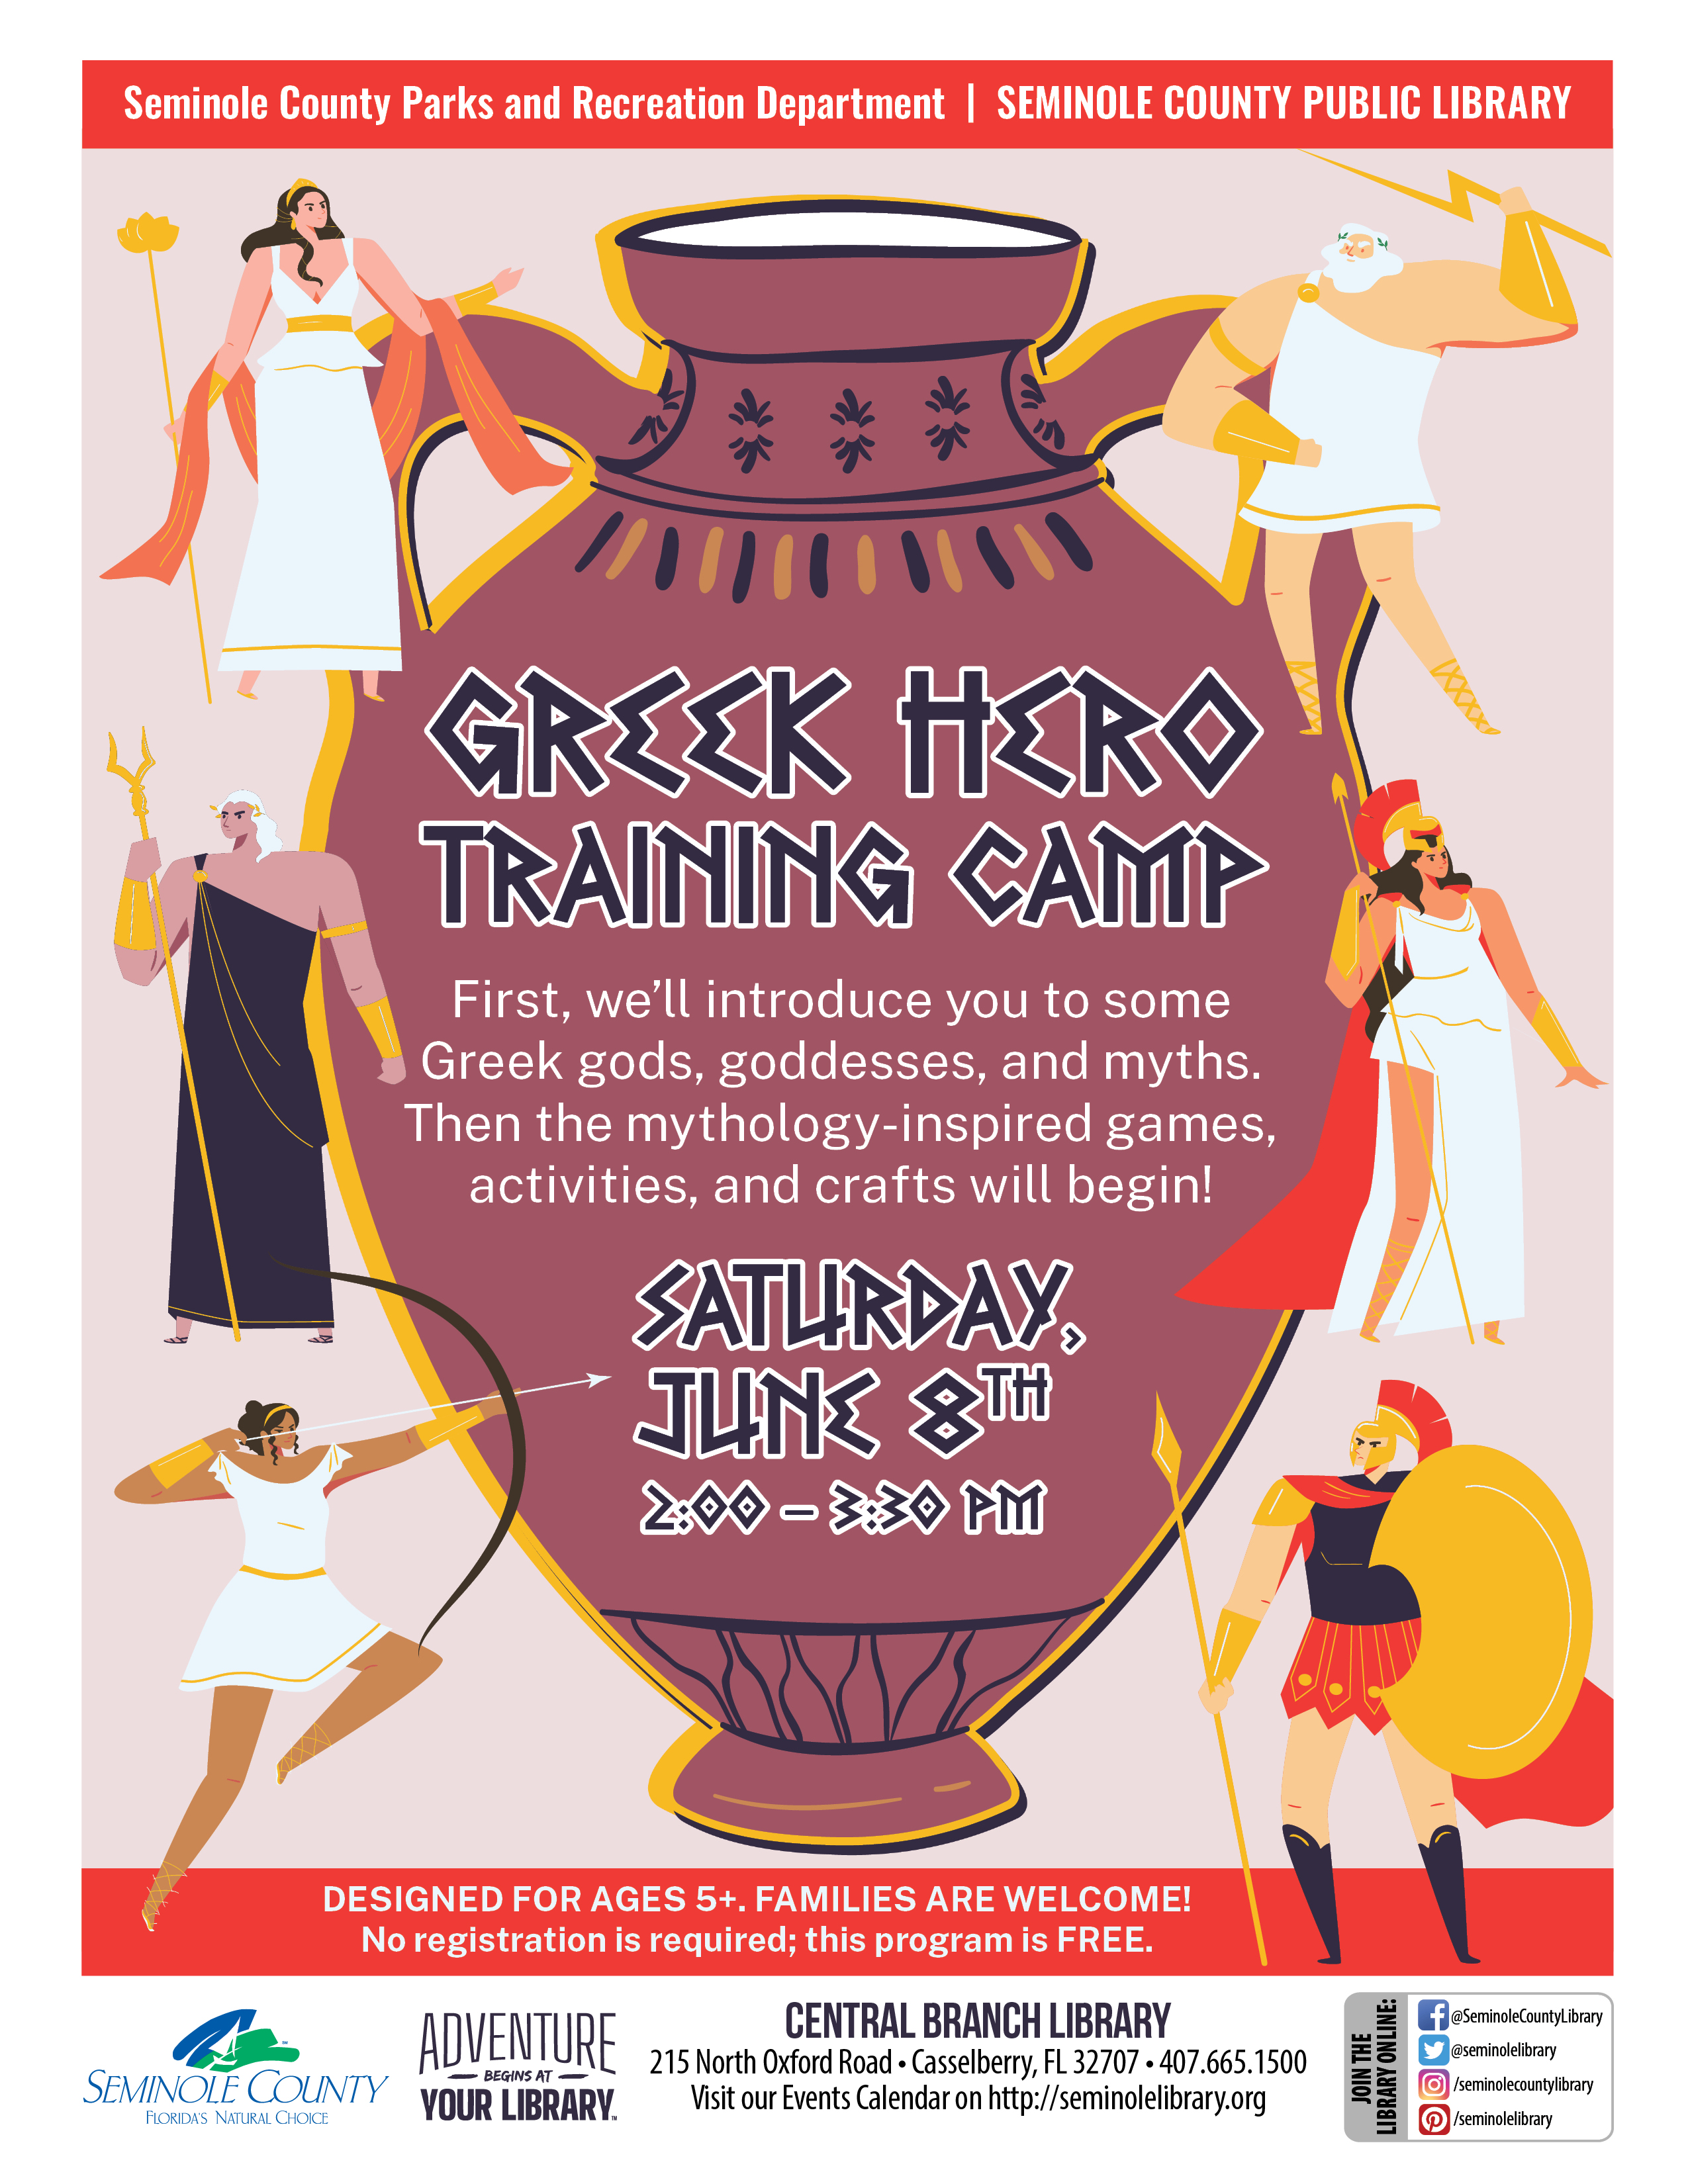 Greek Hero Training Camp - Central Branch Library